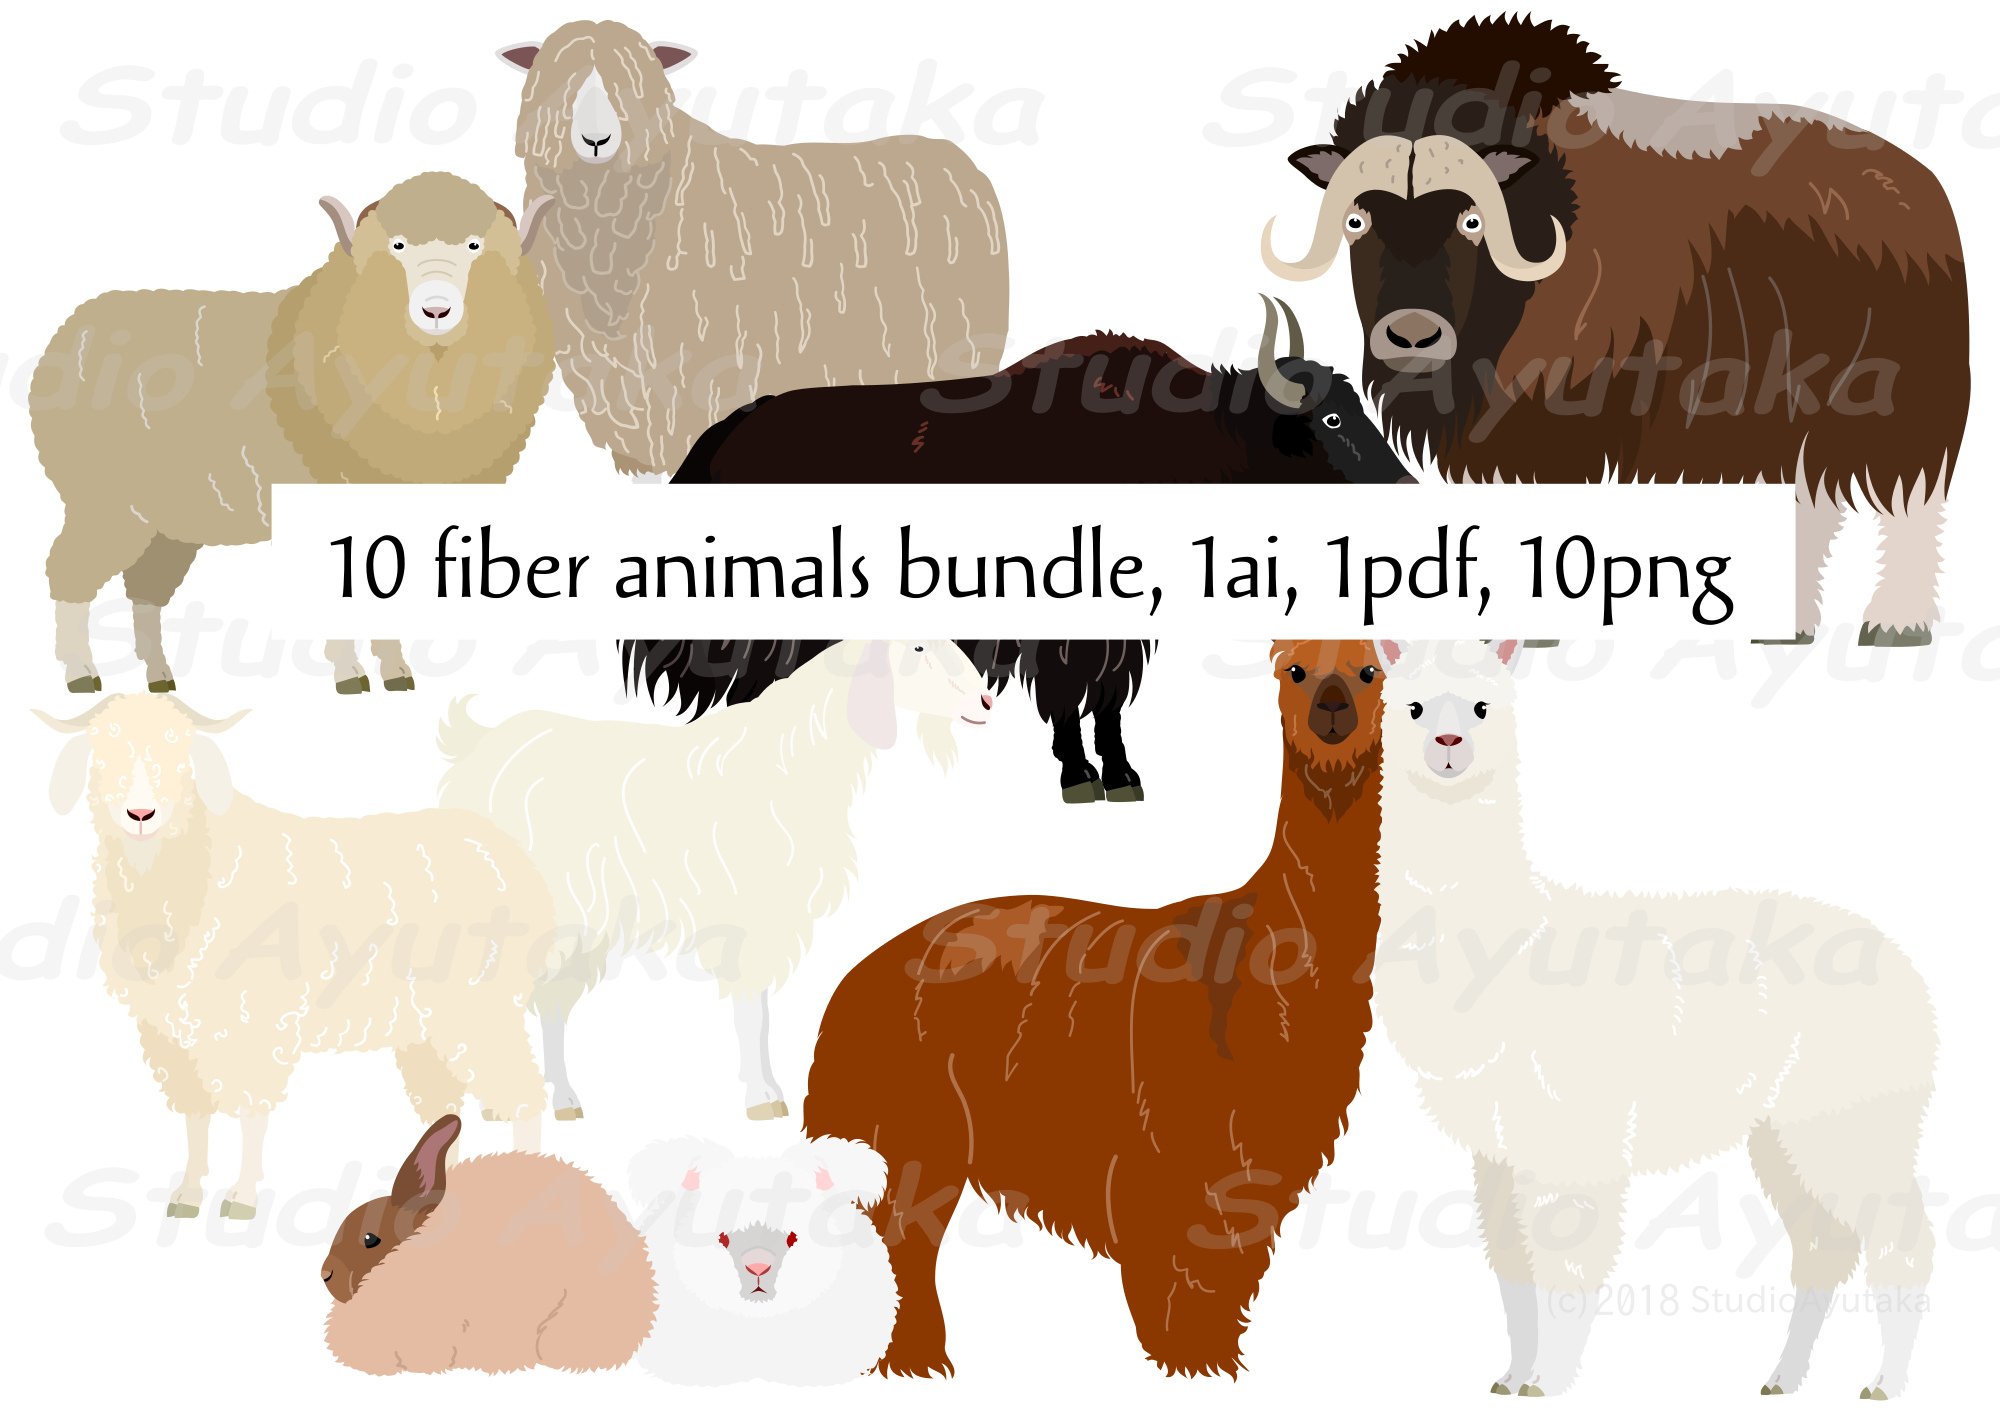 fiber animals group cover image.